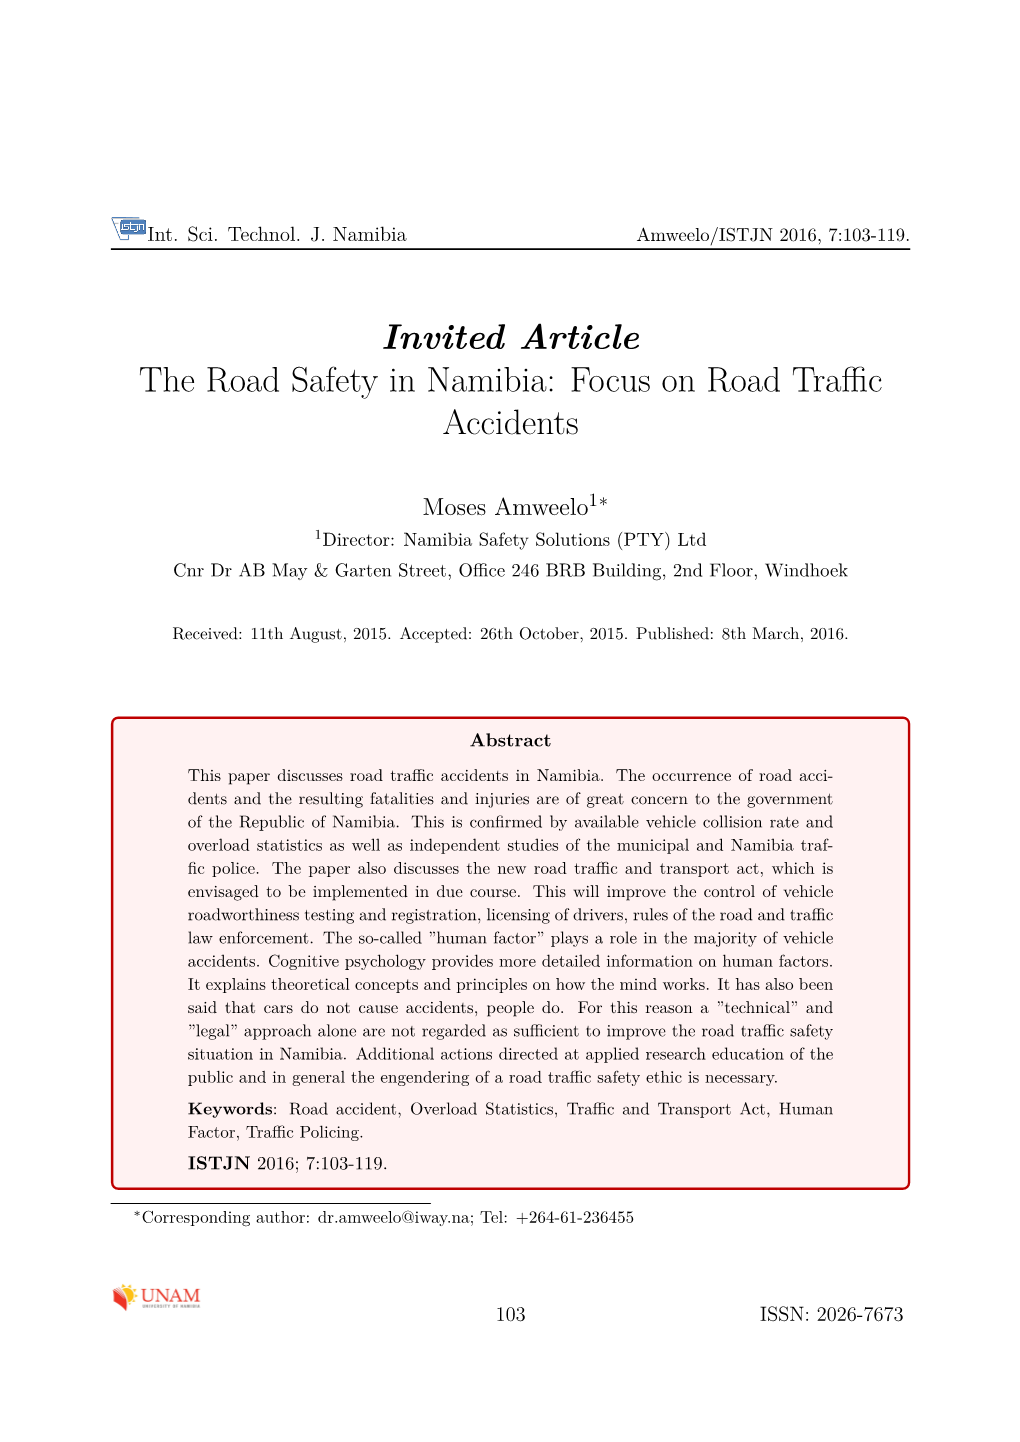 Invited Article the Road Safety in Namibia: Focus on Road Traffic